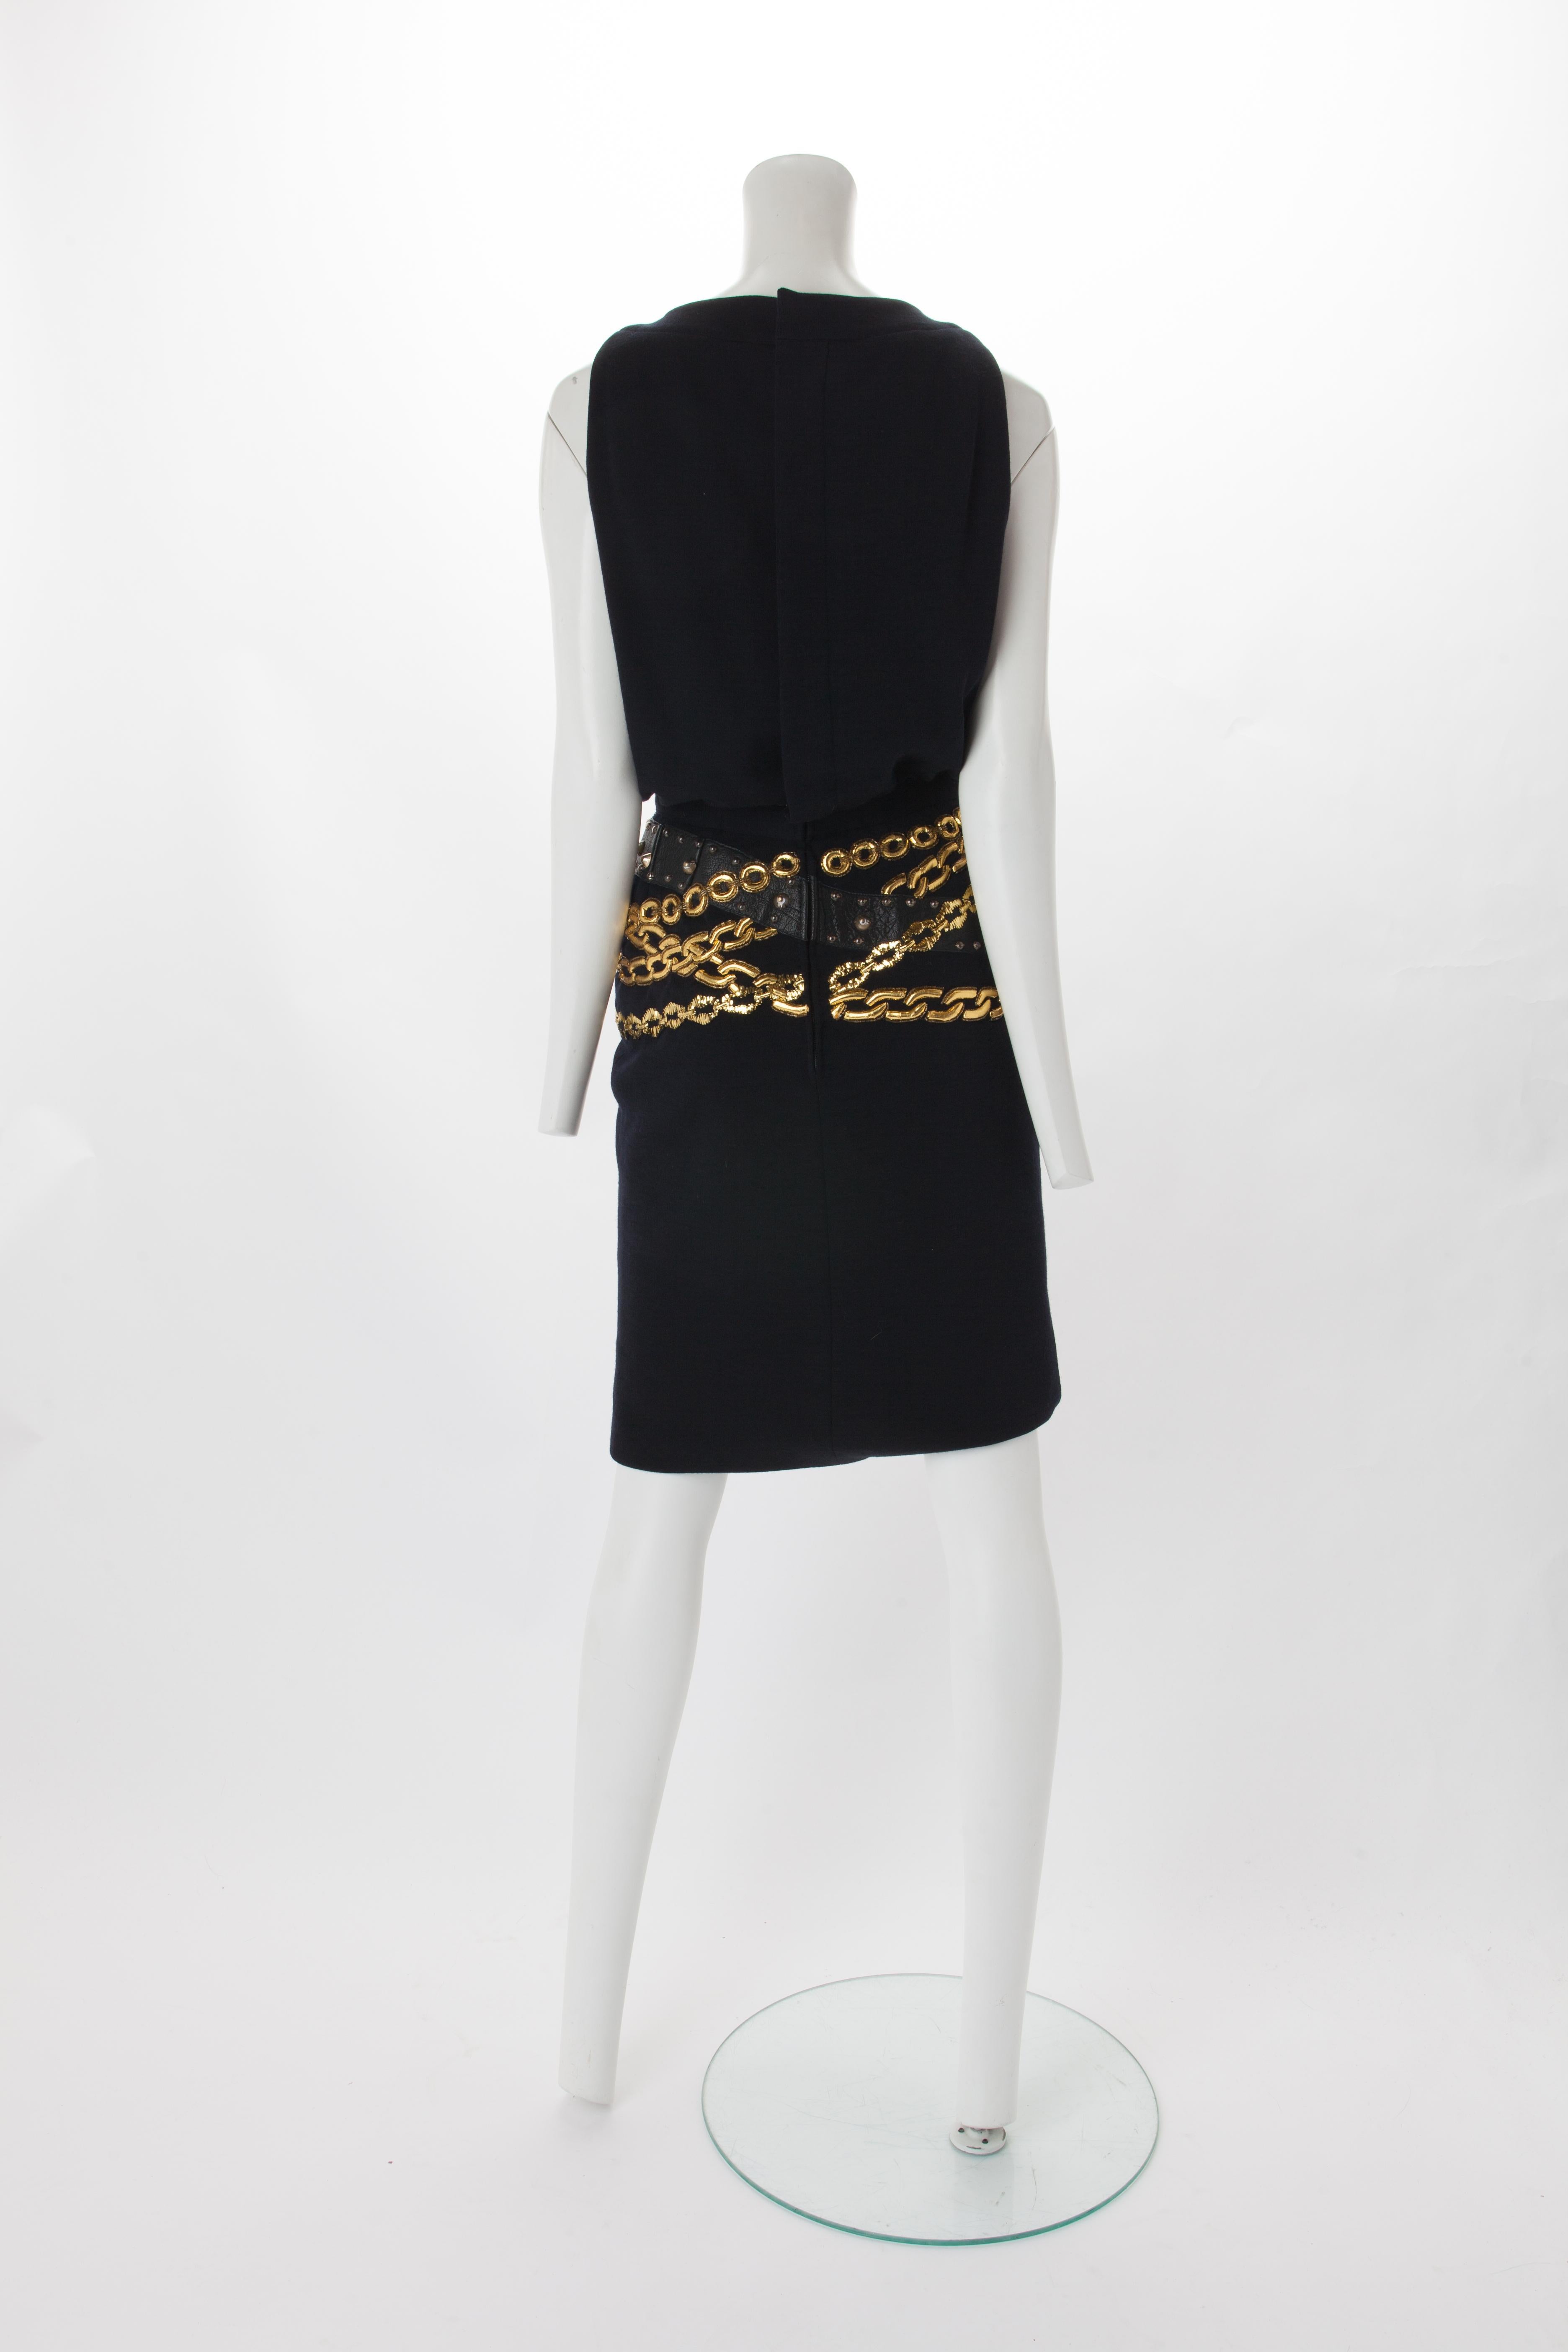 Chanel Black Wool Dress with Gold Chain Trompe L'oeil, 1985.
Crew neck wool dress with buttons down the center of the bodice and two buttoned pockets at bust. Features waist band with black leather and gold chain detail wrapping around the hip.